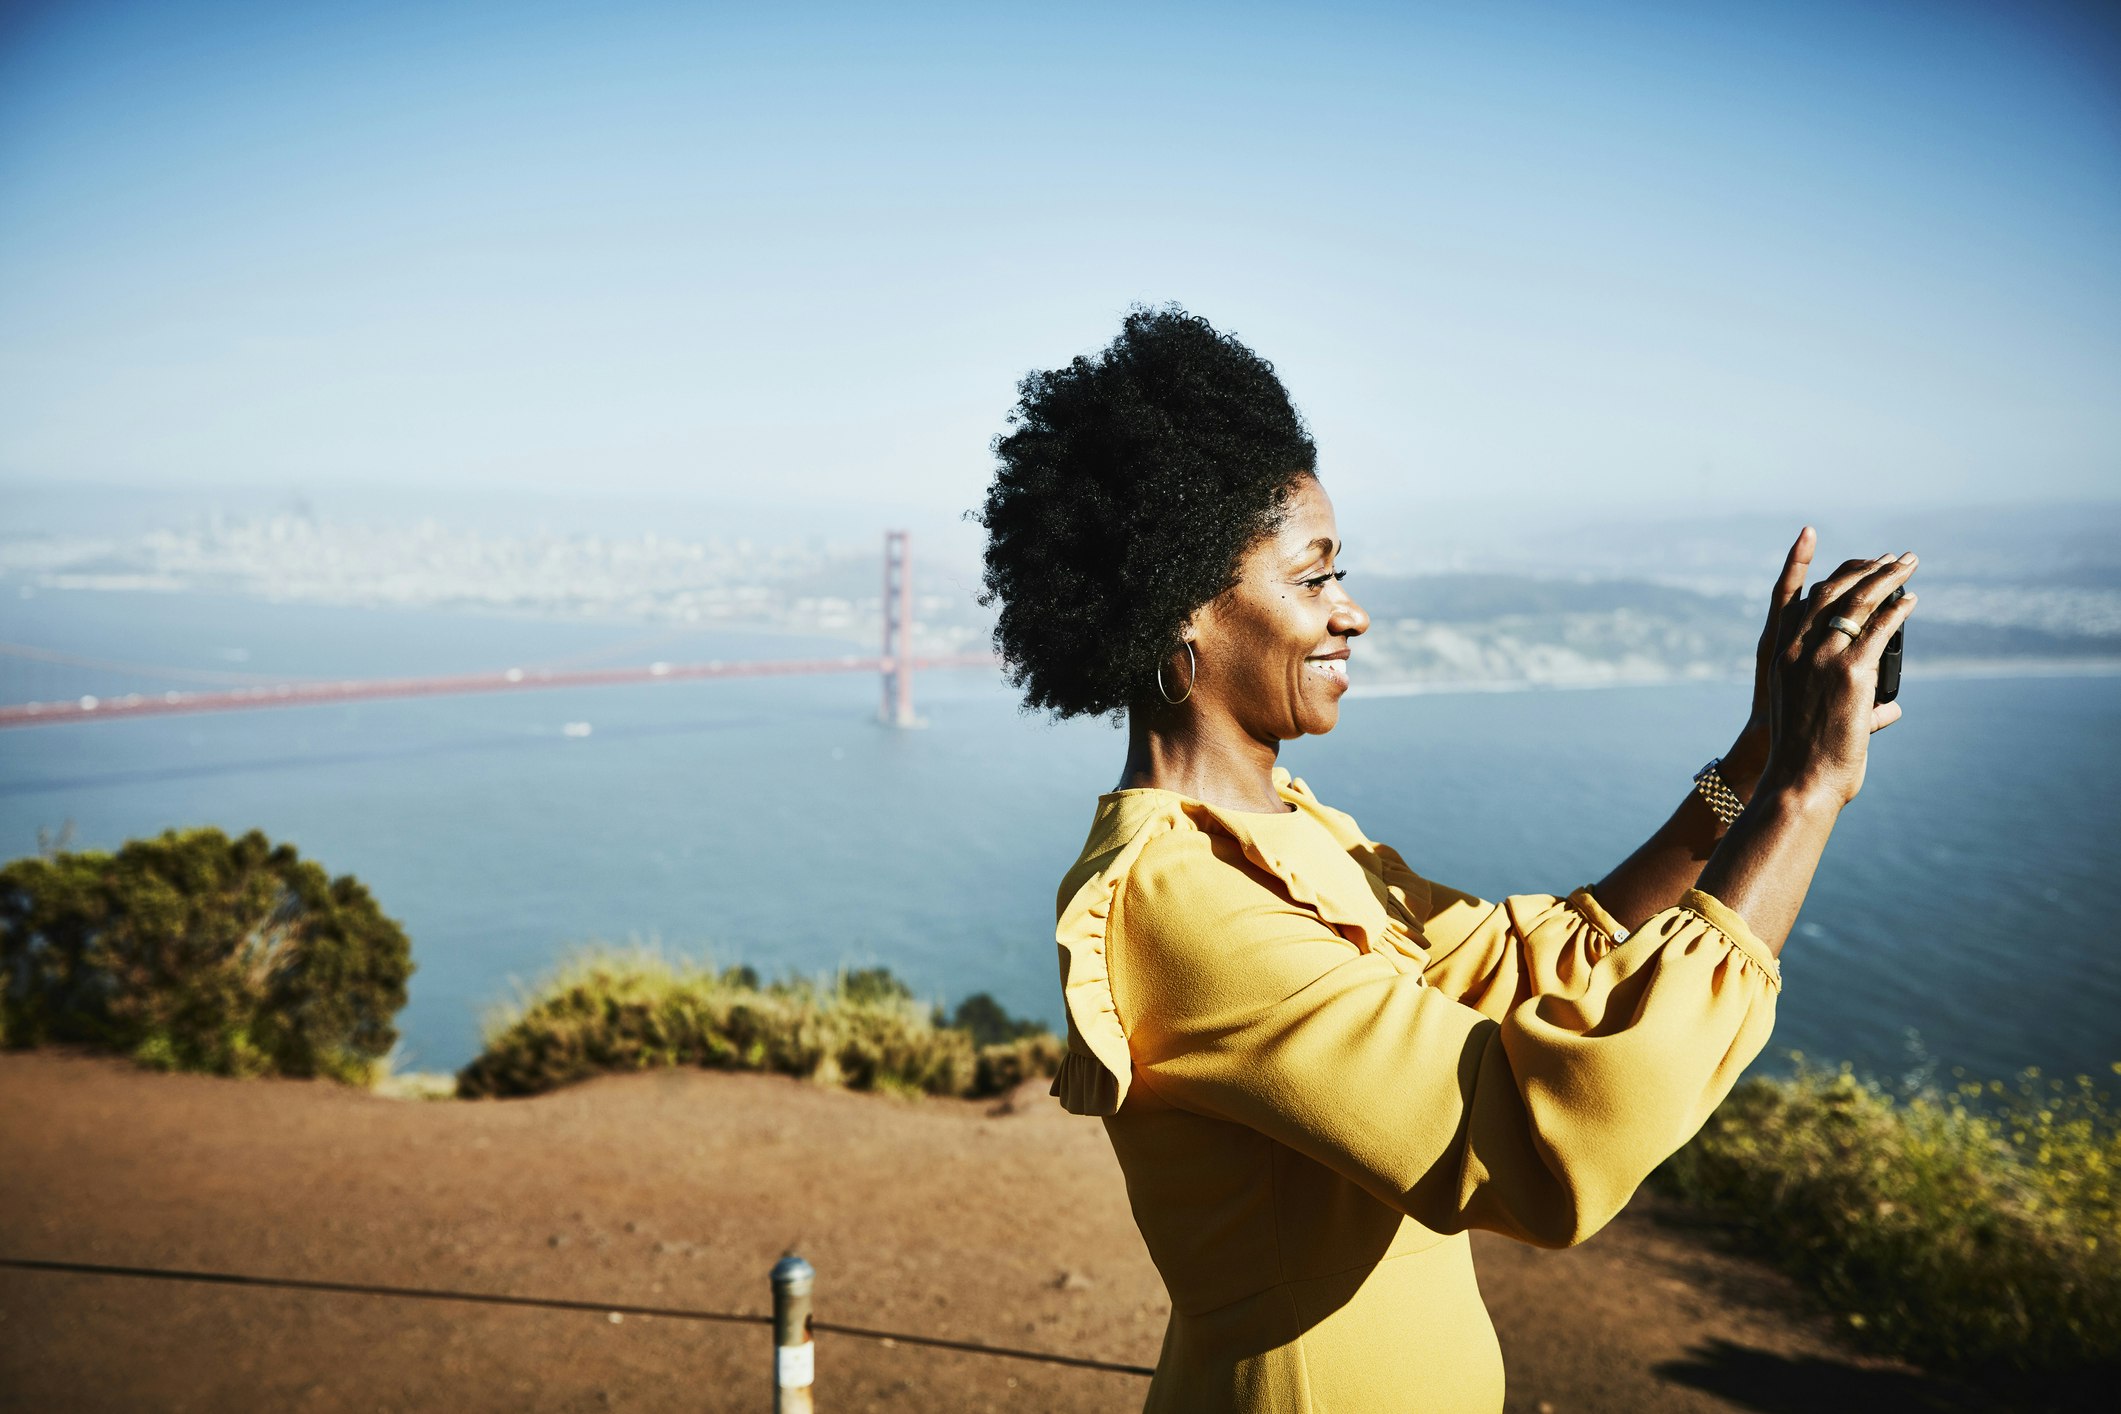 A smiling woman takes a photo with smartphone while standing at a vista at the Golden Gate Bridge above San Francisco, California